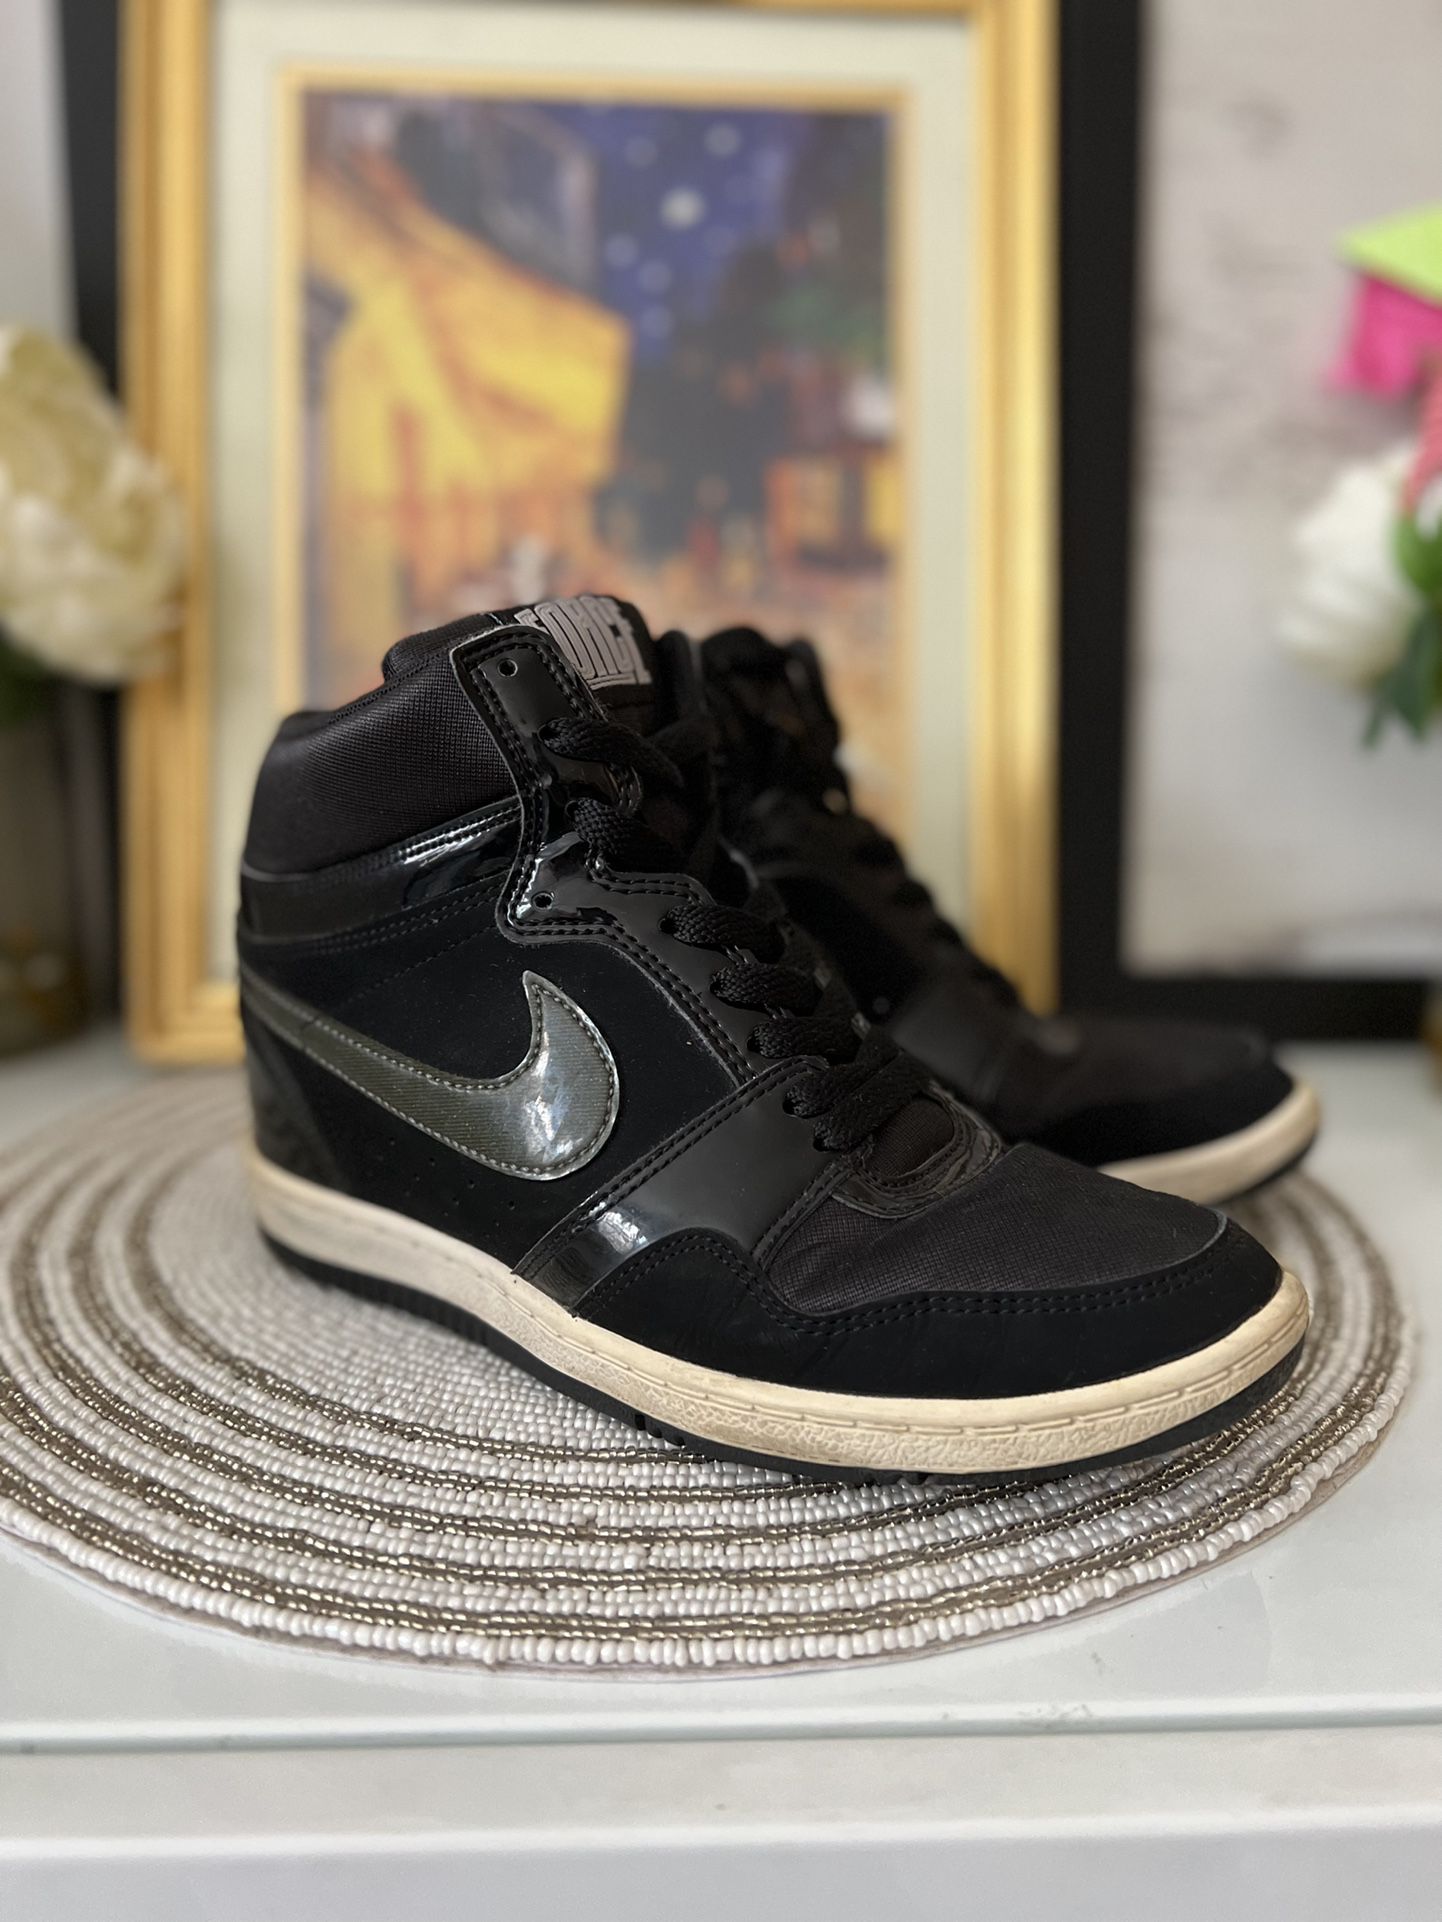 Nike Air Force High Hidden Wedge Shoes Womens for Sale in New York, New - OfferUp